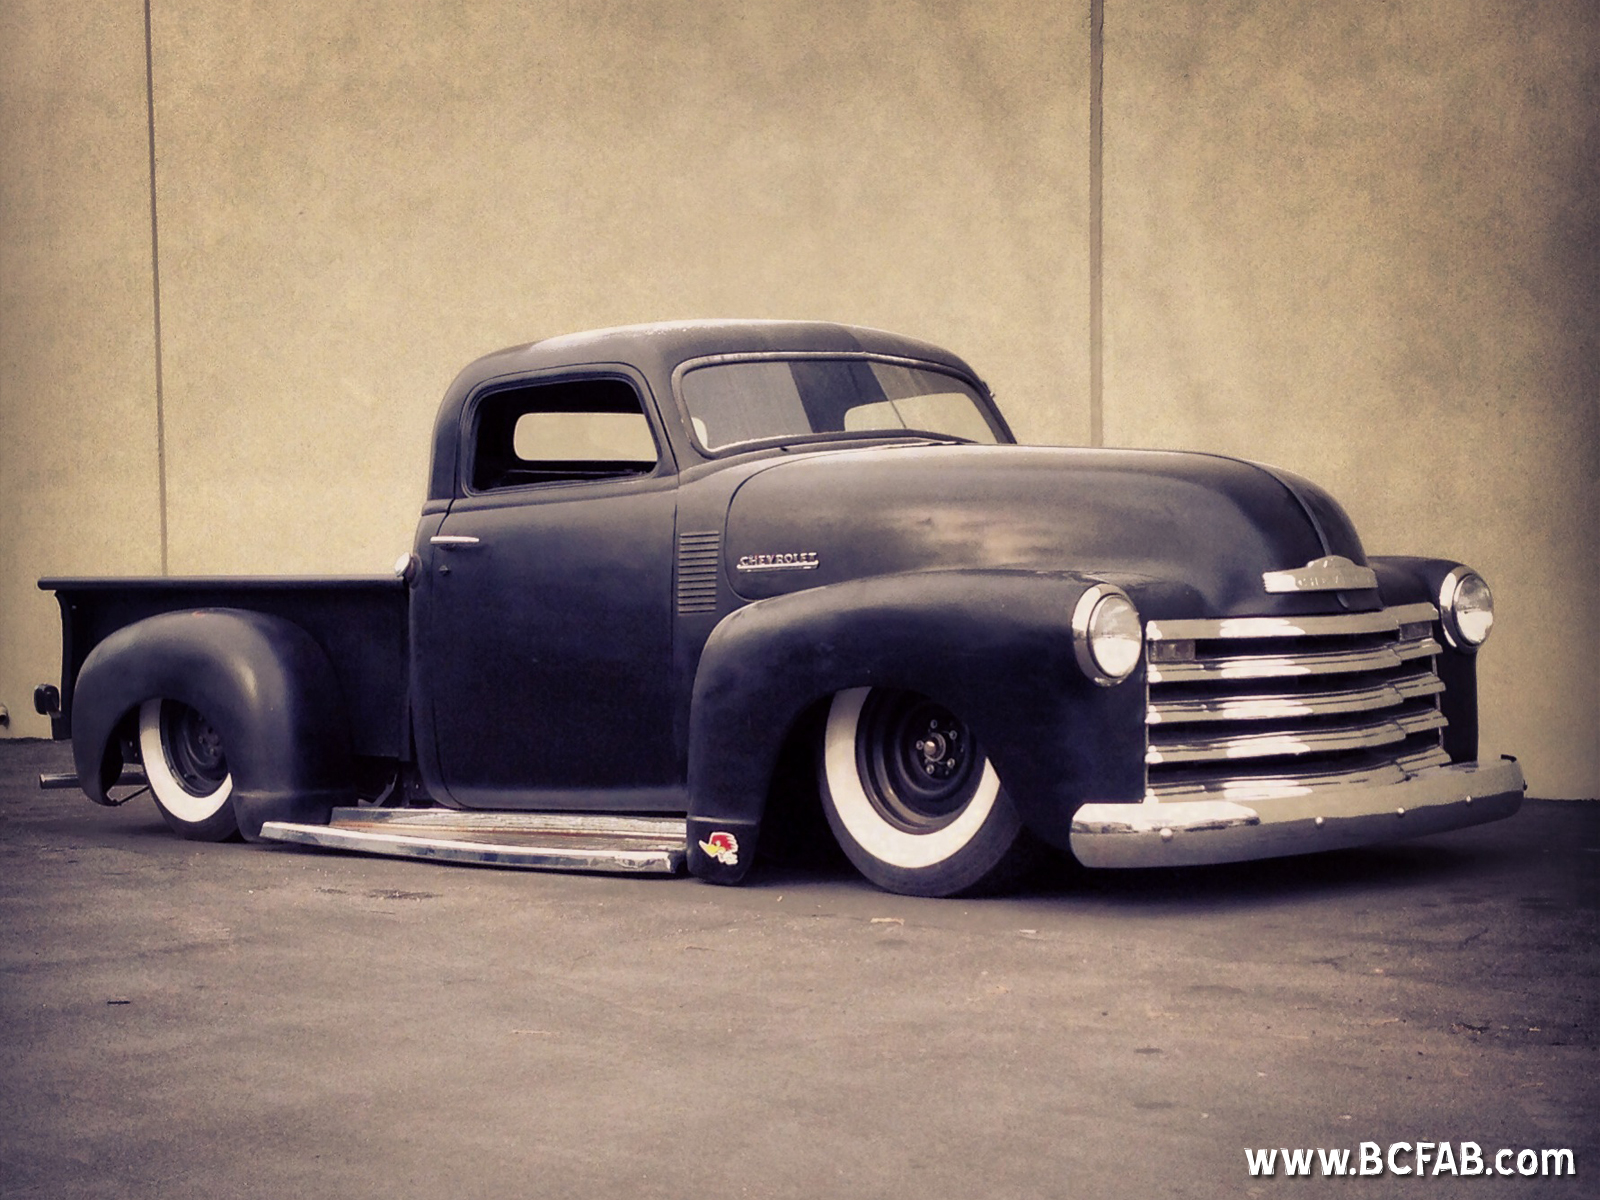 BC Fabrication  Addisons 51 Chevy Truck   Bagged and Chopped